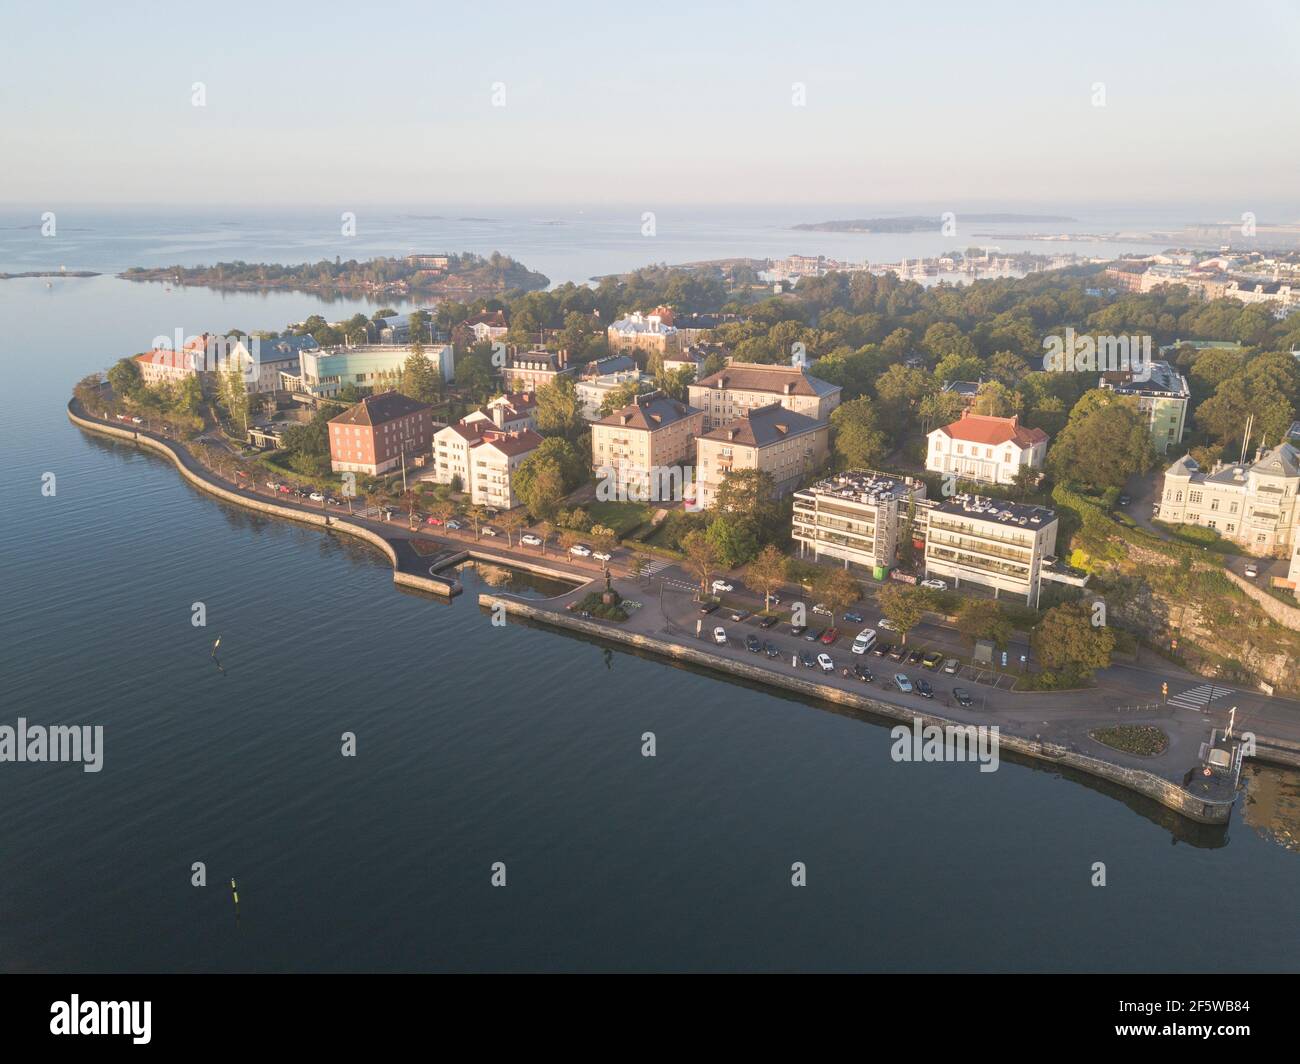 The south harbor in Helsinki, Finland Stock Photo